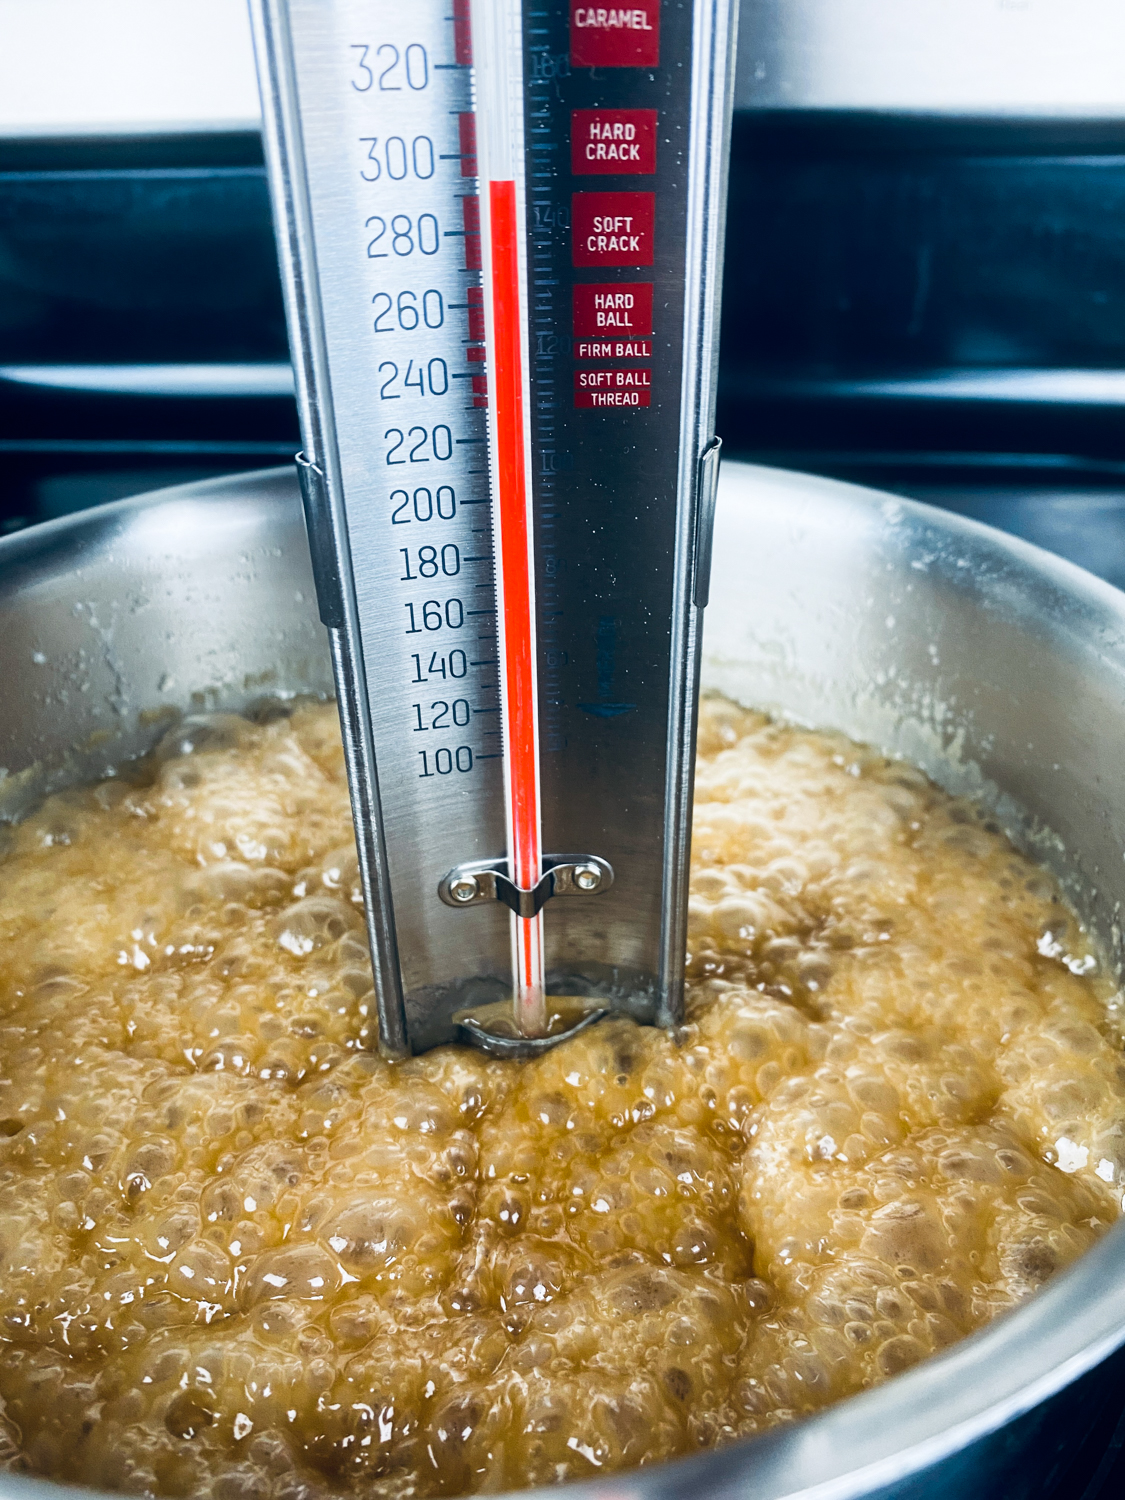 The candy mixture is boiling and temperature on the candy thermometer shows it has reached the hard crack stage.